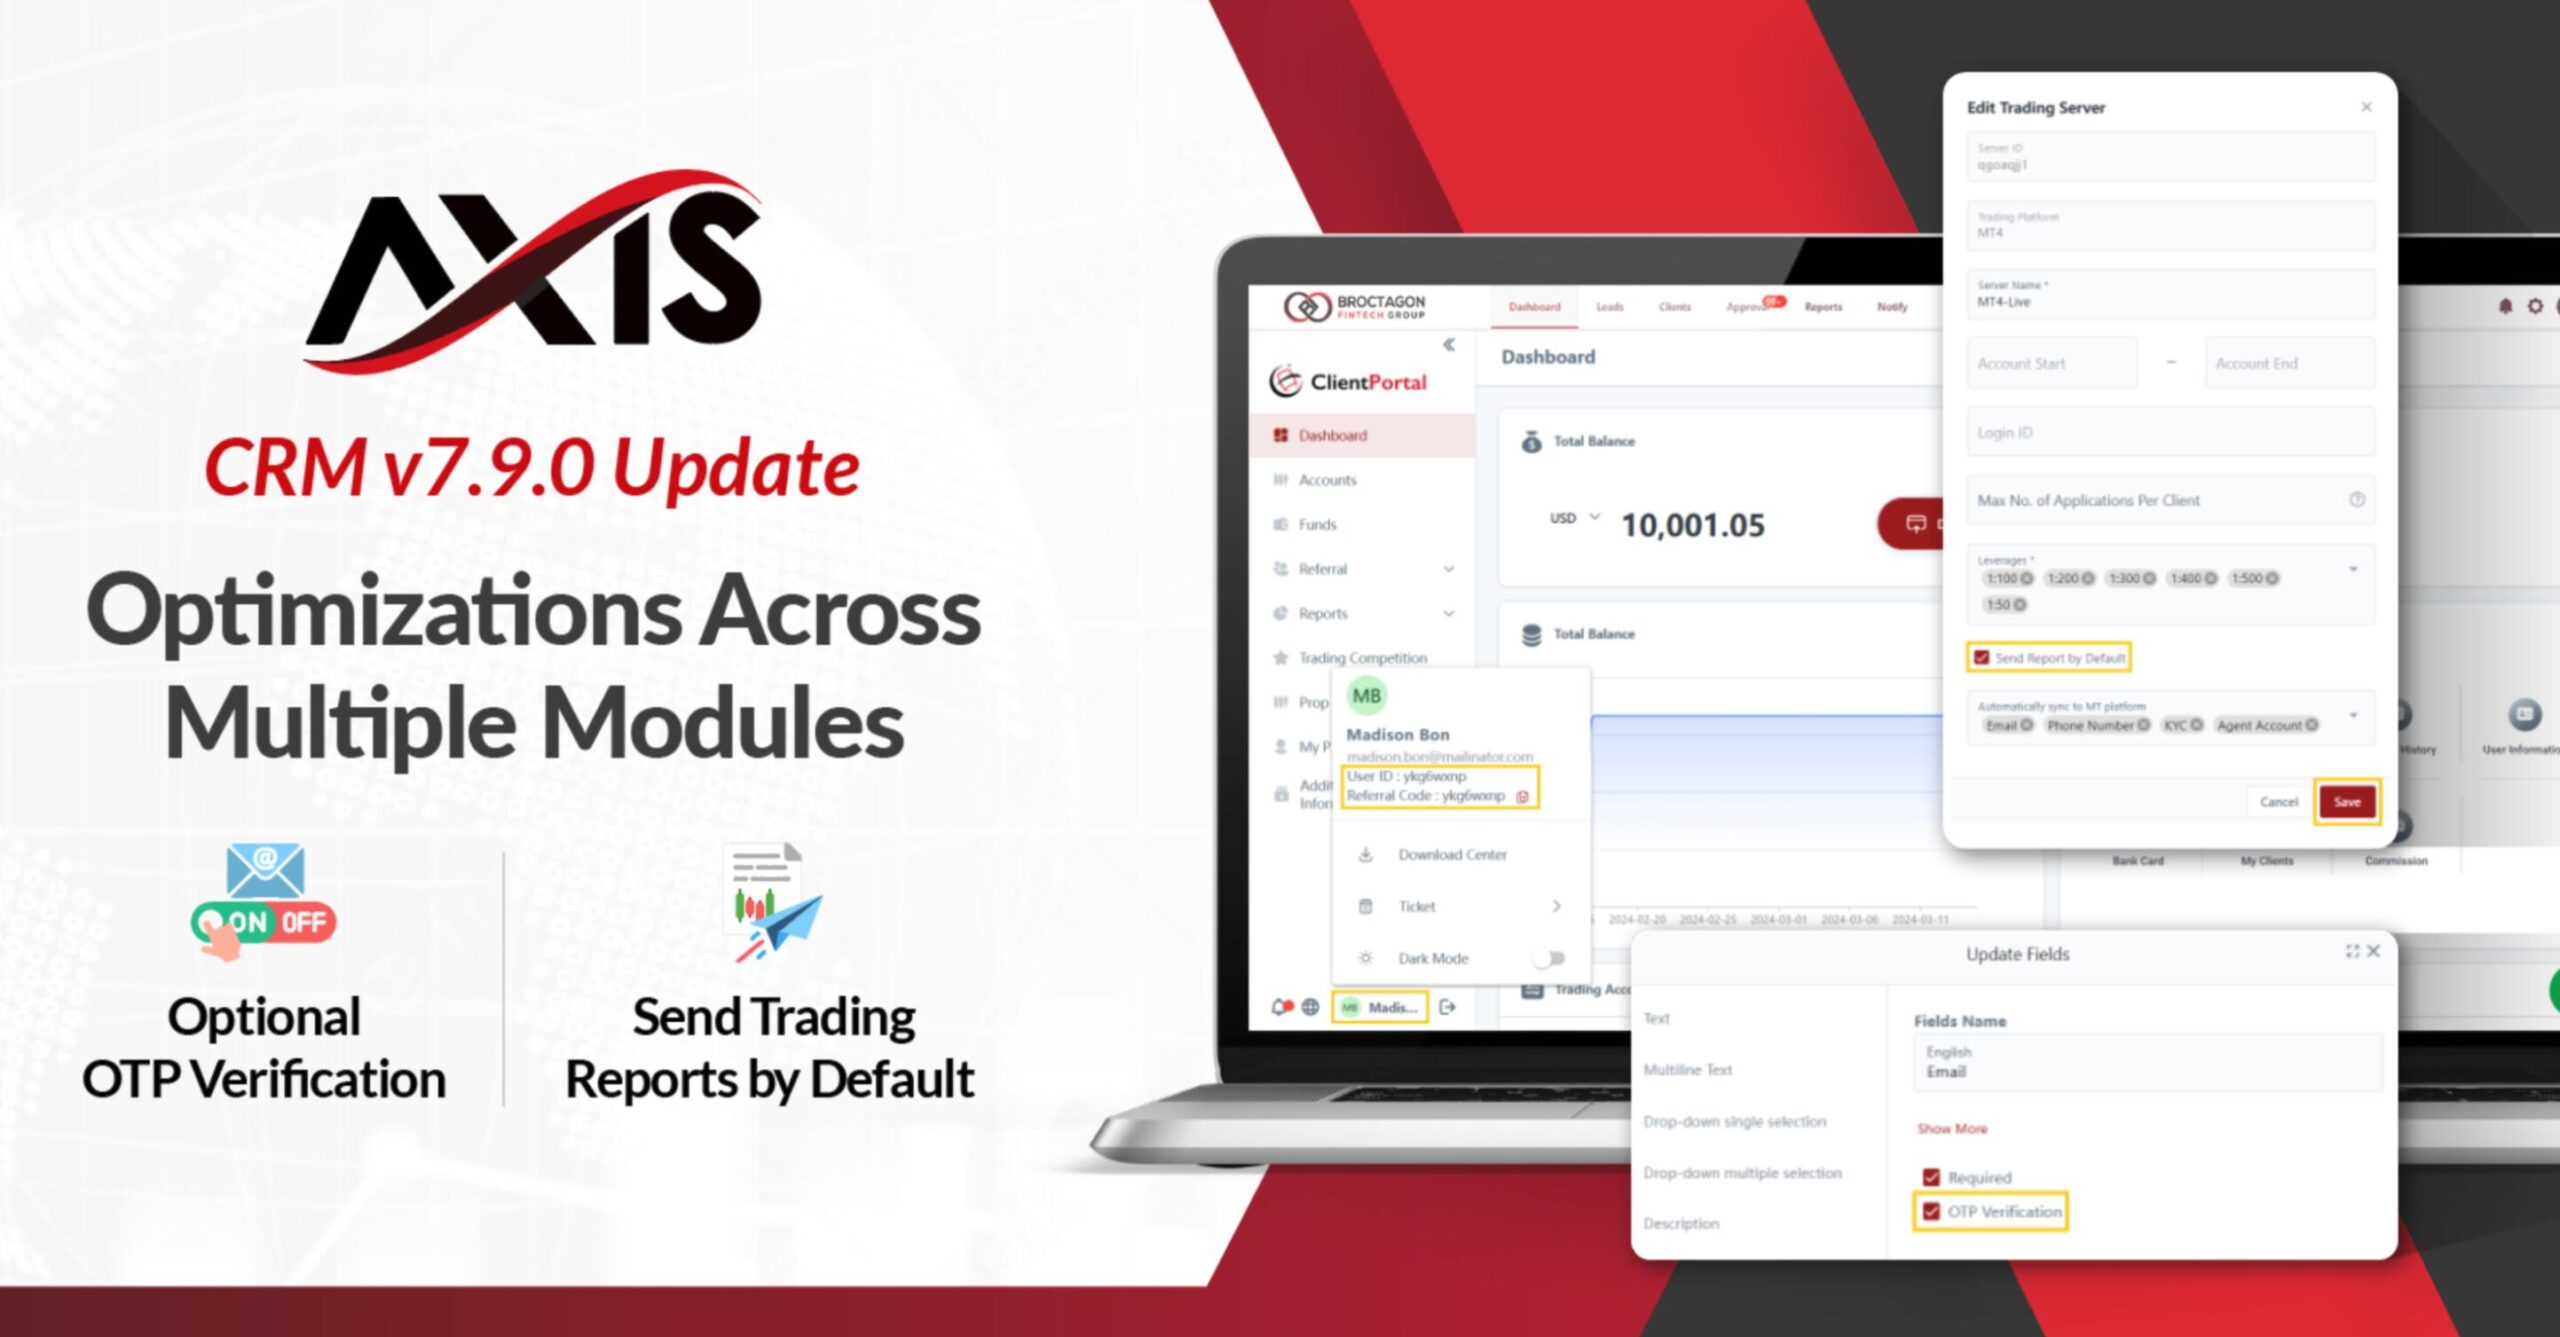 AXIS CRM v7.9.0 Update